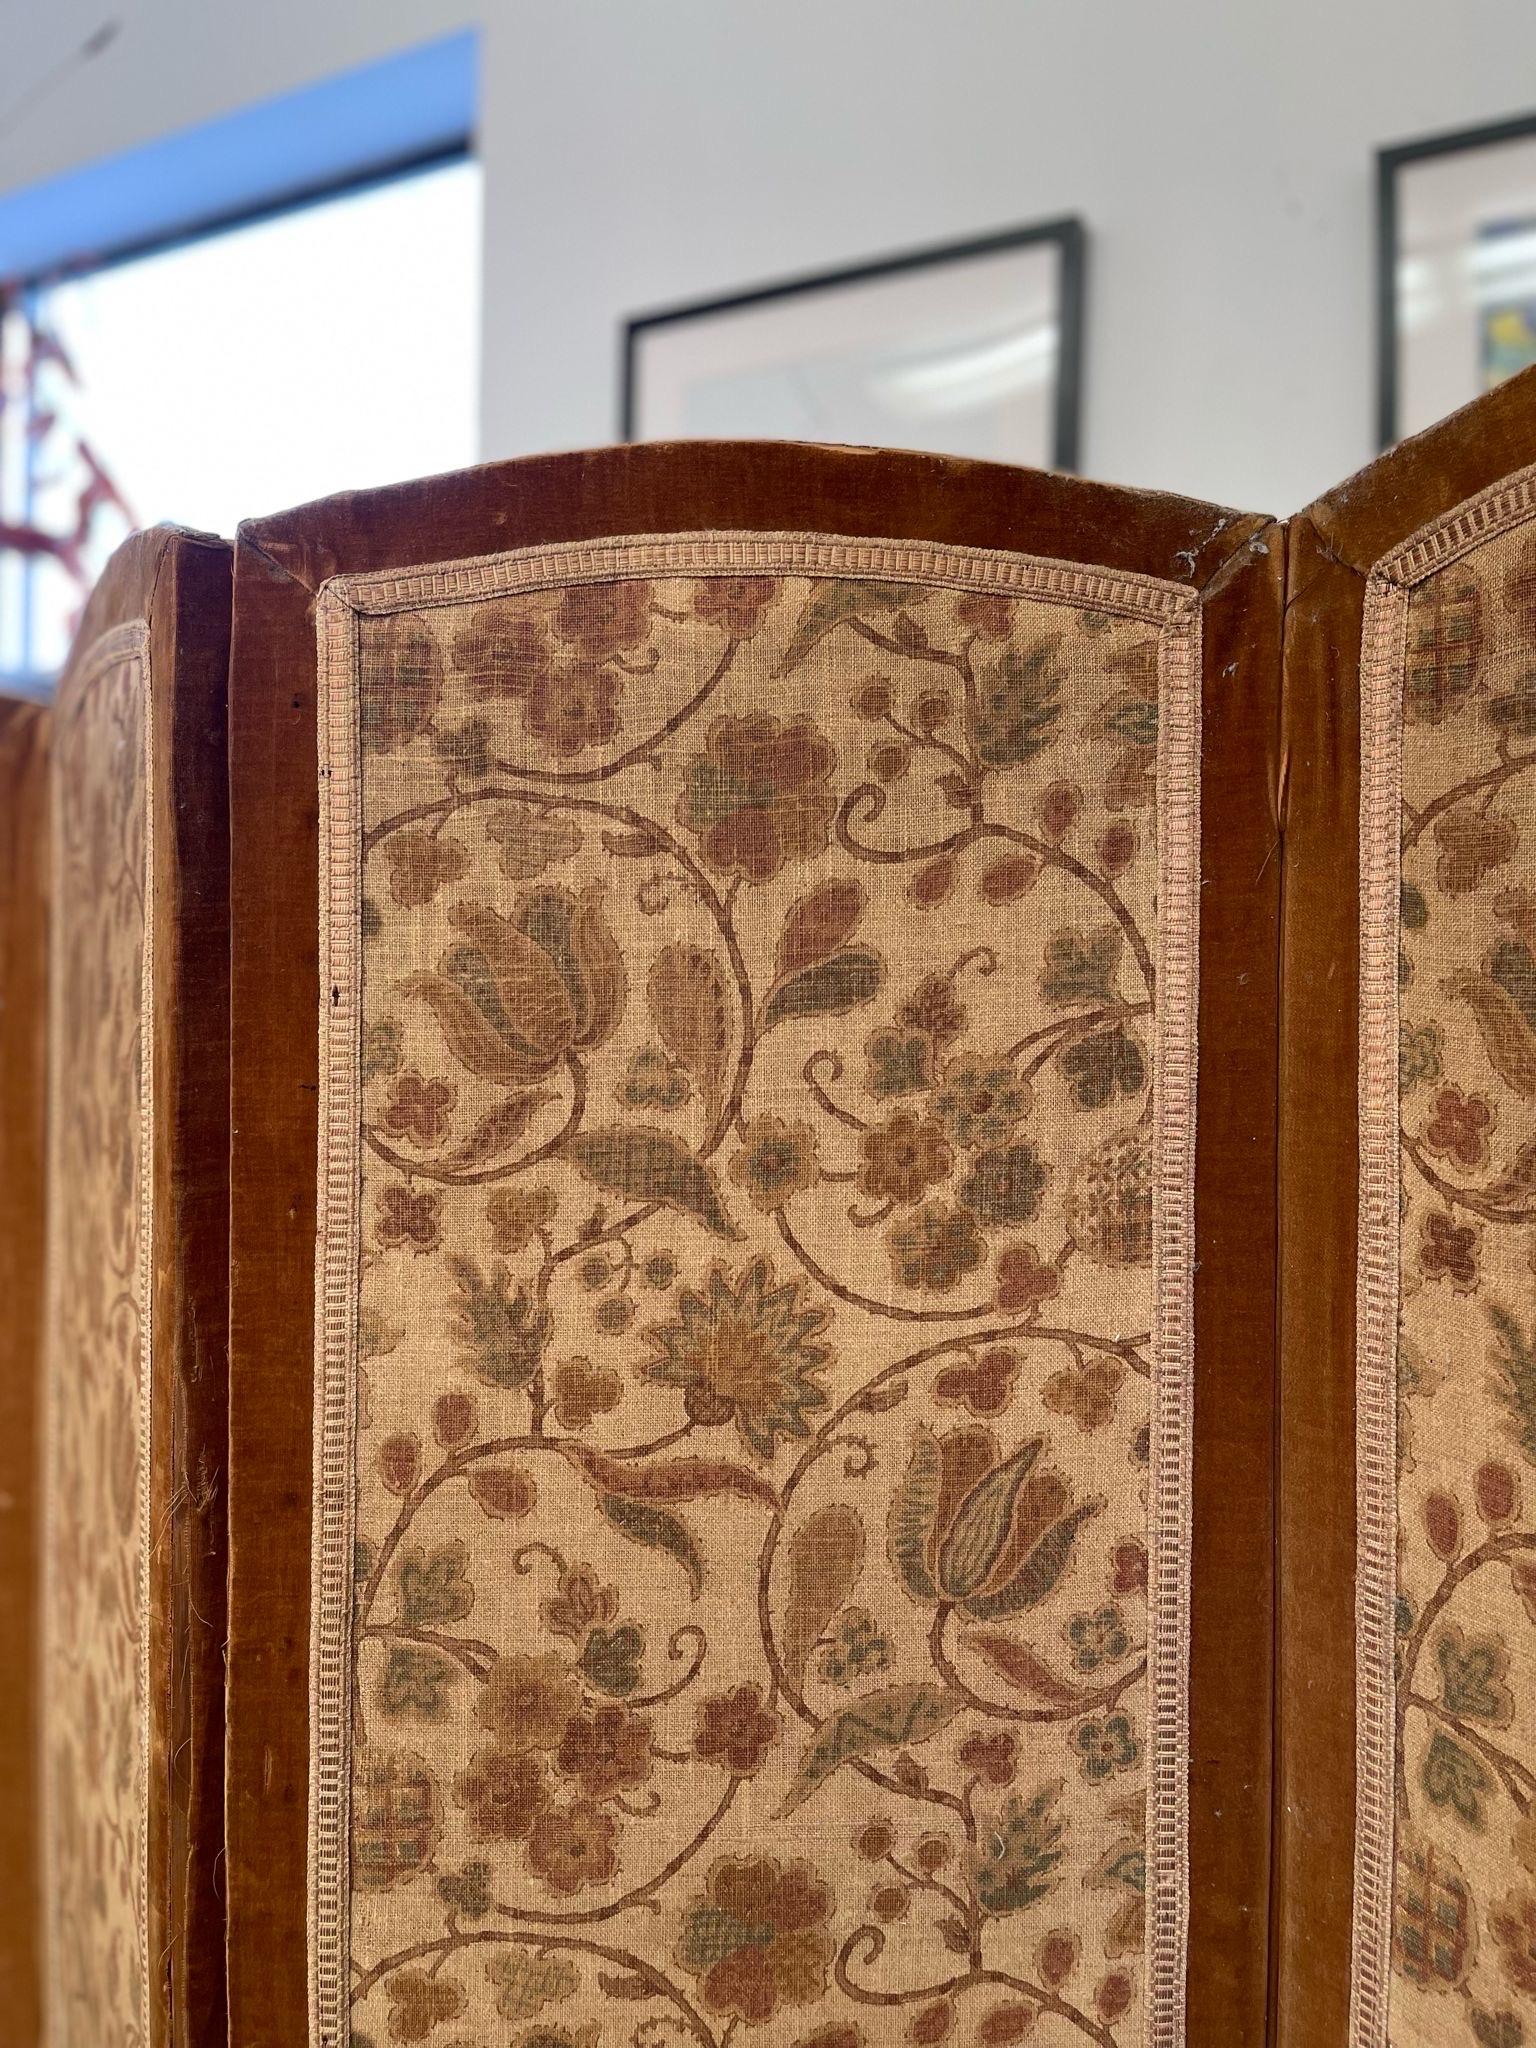 William Morris Style Fabric Design. Wood and Fabric Room Divider. Slight Curvature on the top of the Panels. Orange Toned Velvet Accent on one Side. Vintage Condition Consistent with Age as Pictured. Sold as is.

Dimensions. 60 W ; 1 D ; 65 H
     